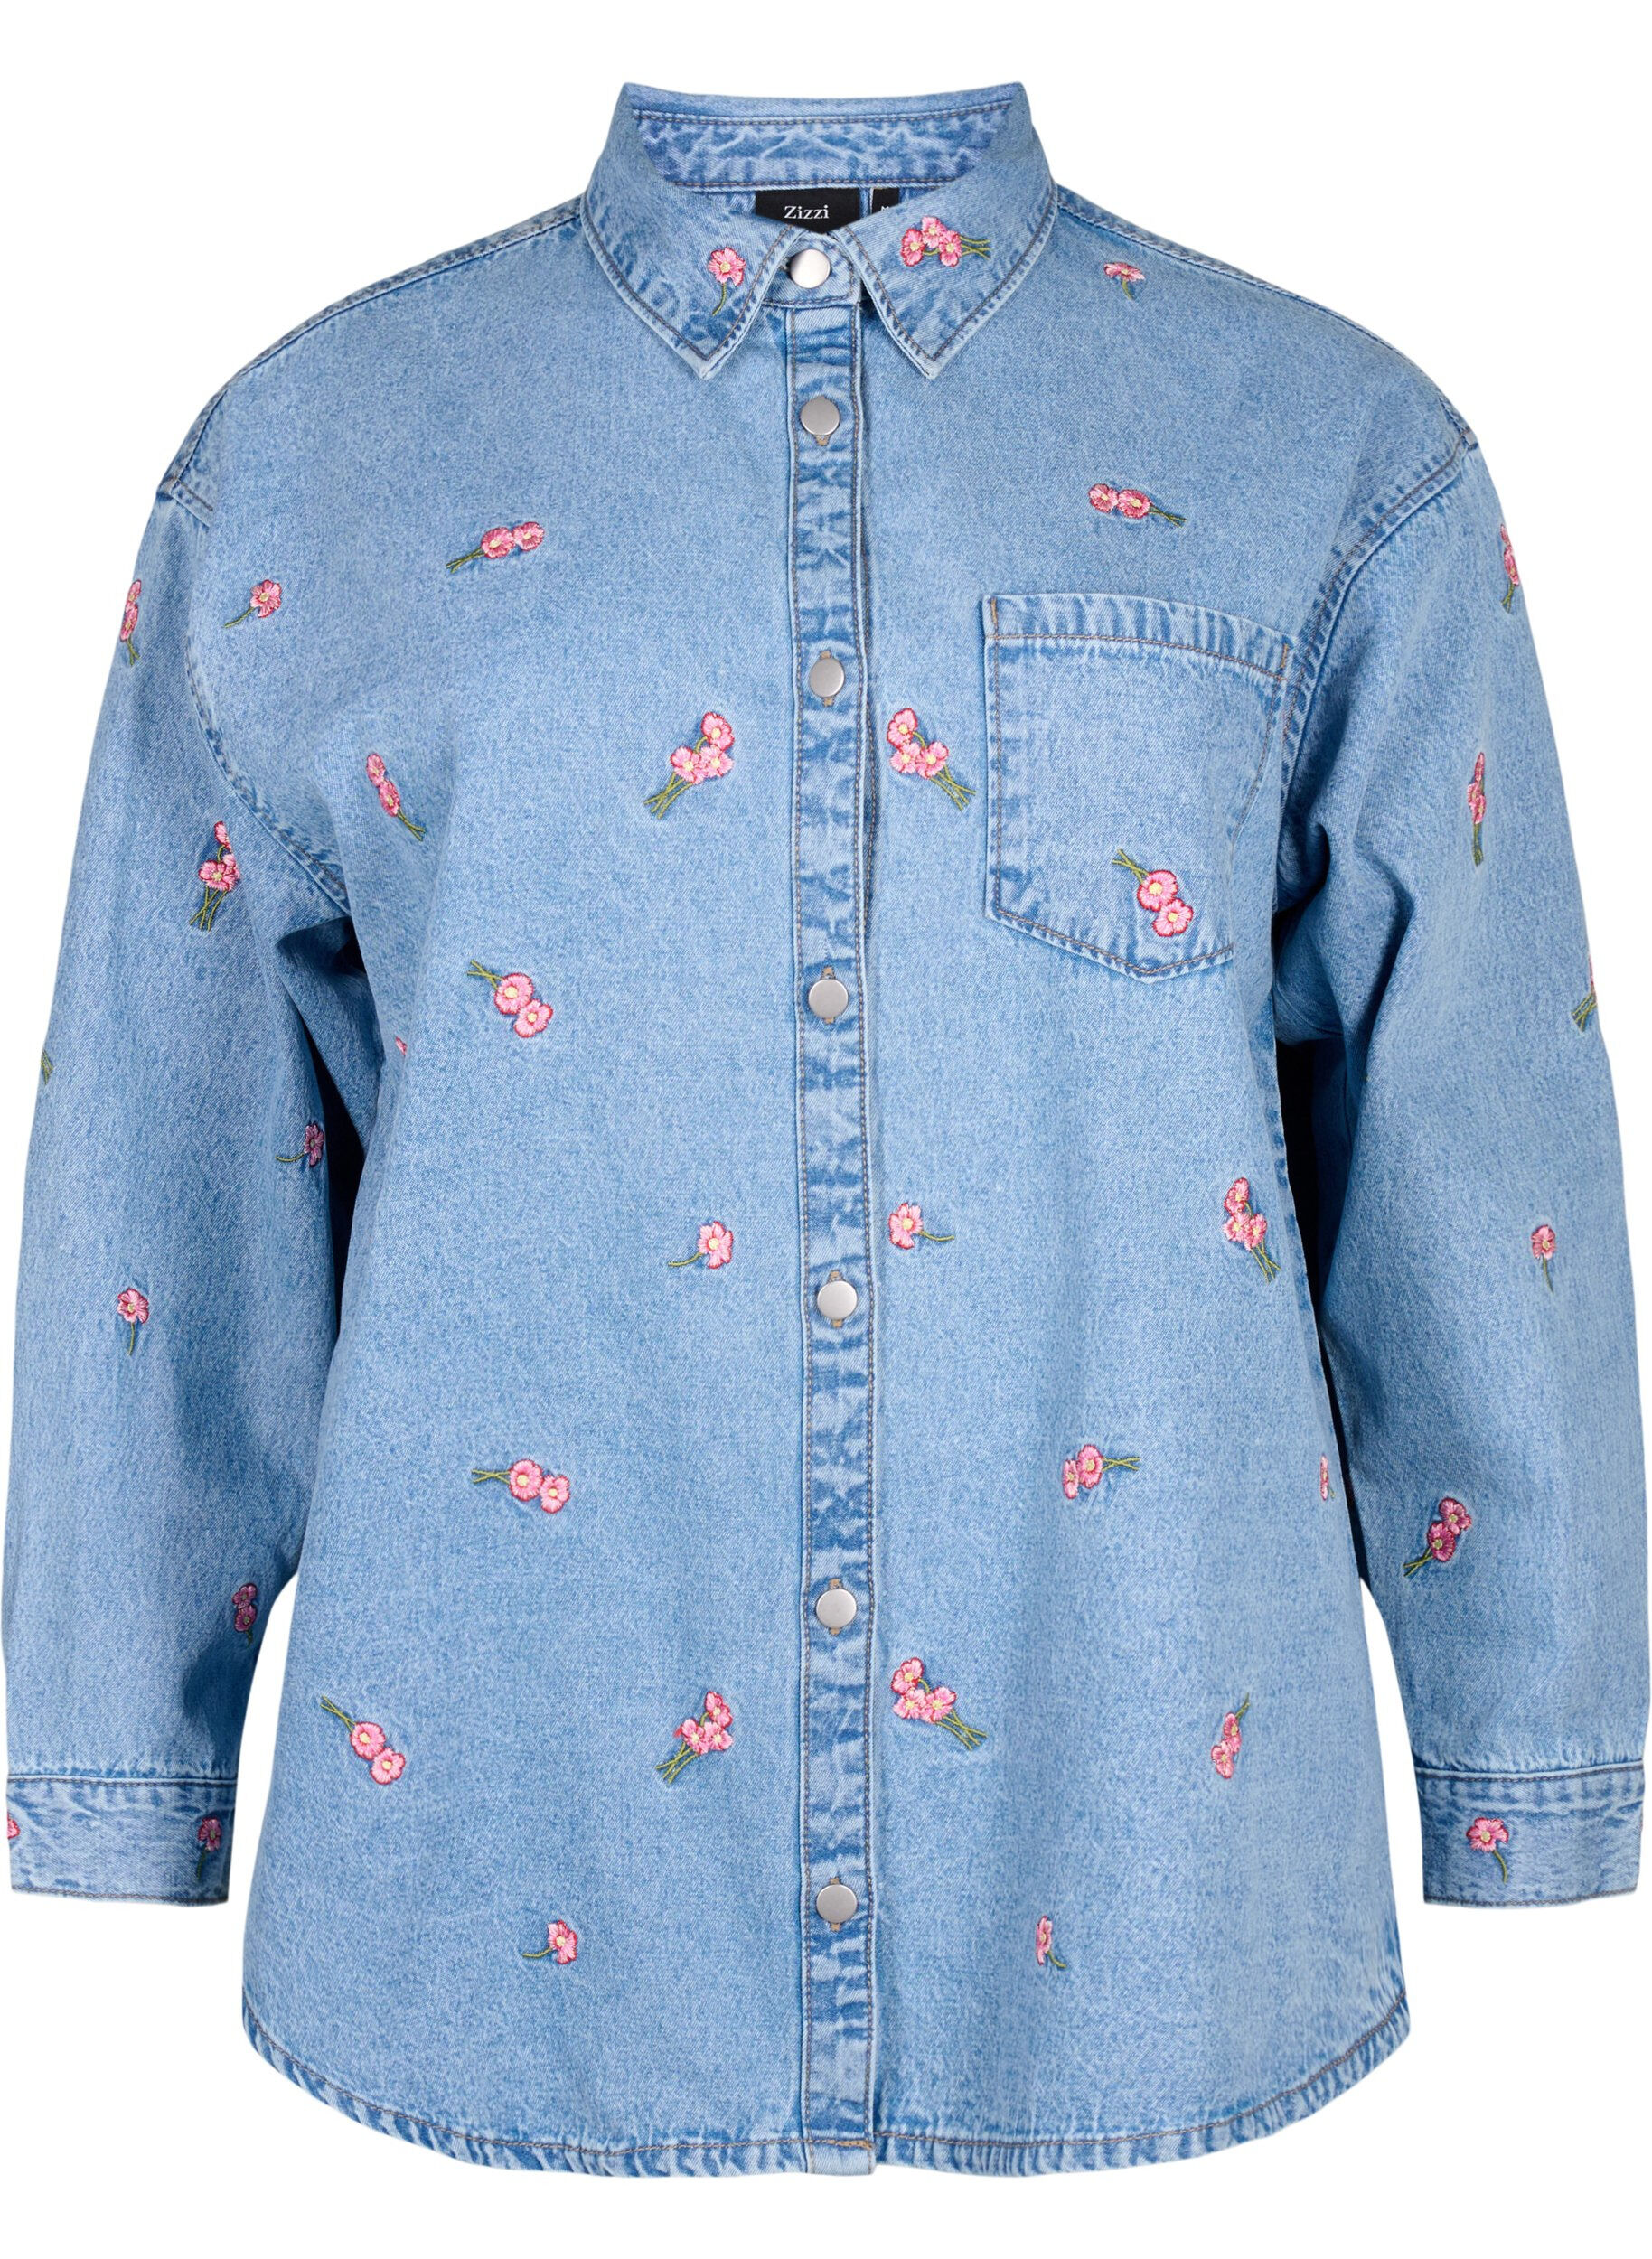 CHICOS XS 00 NEW floral embroidered denim shirt opal wash jwla style blouse  fall | eBay